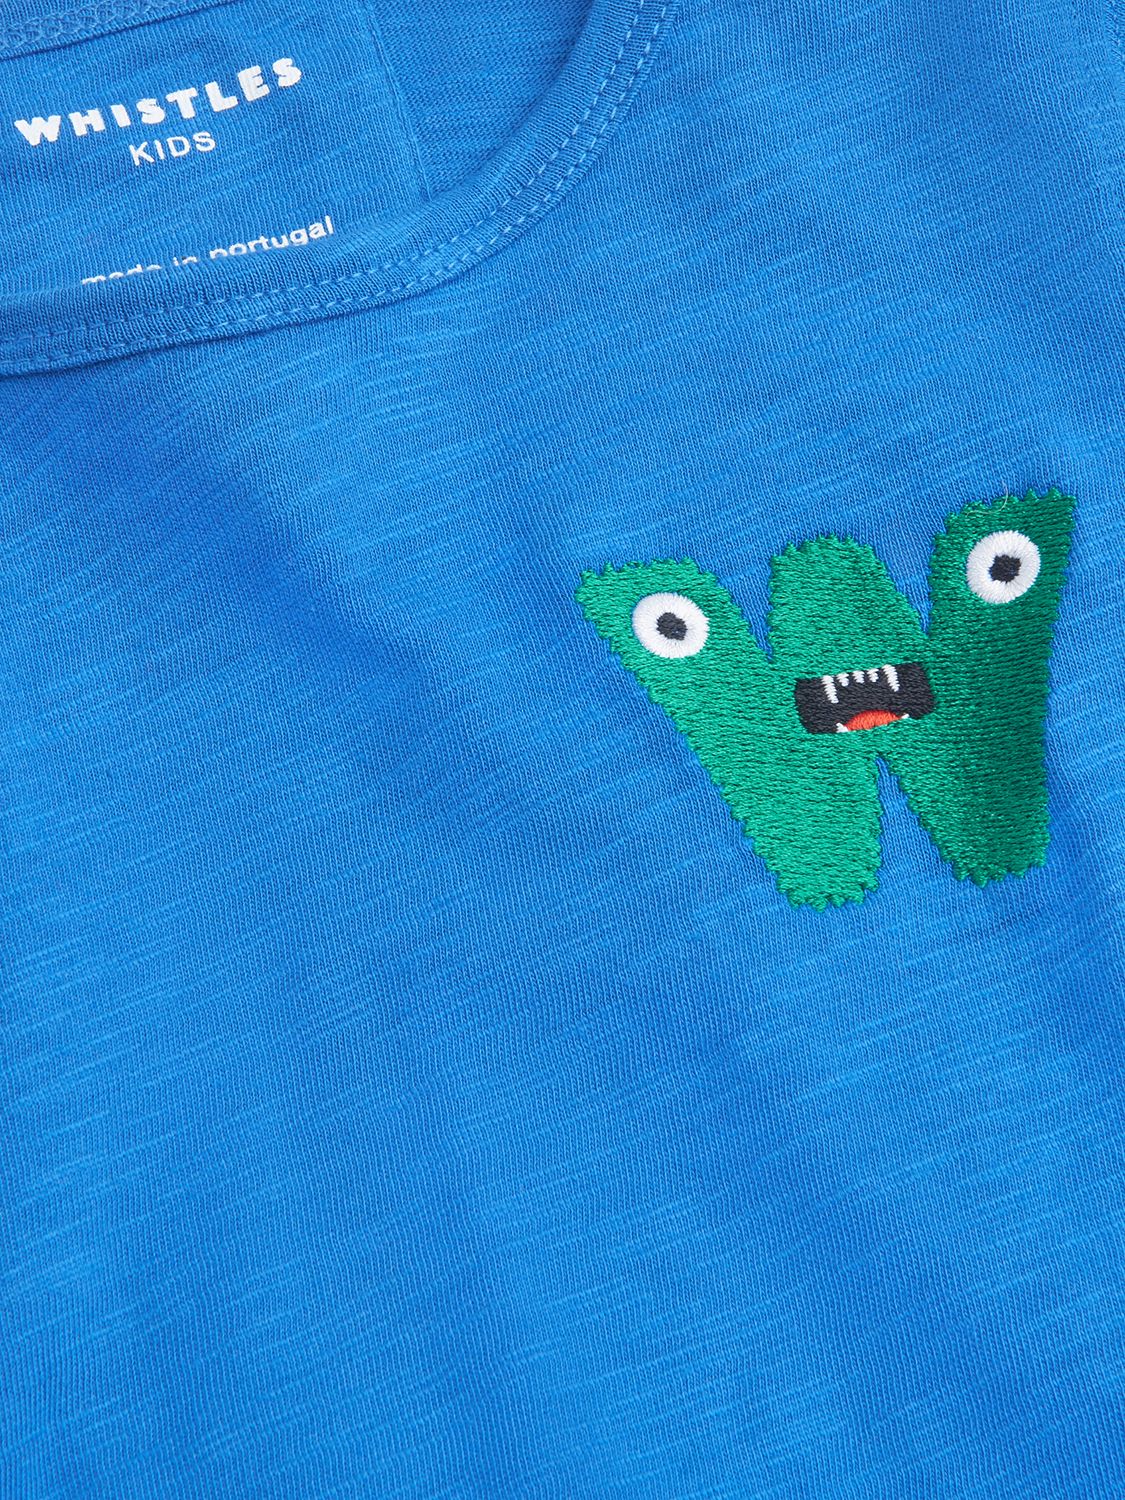 Whistles Kids' Monster Embroidered Long Sleeve Top, Blue, 3-4 years